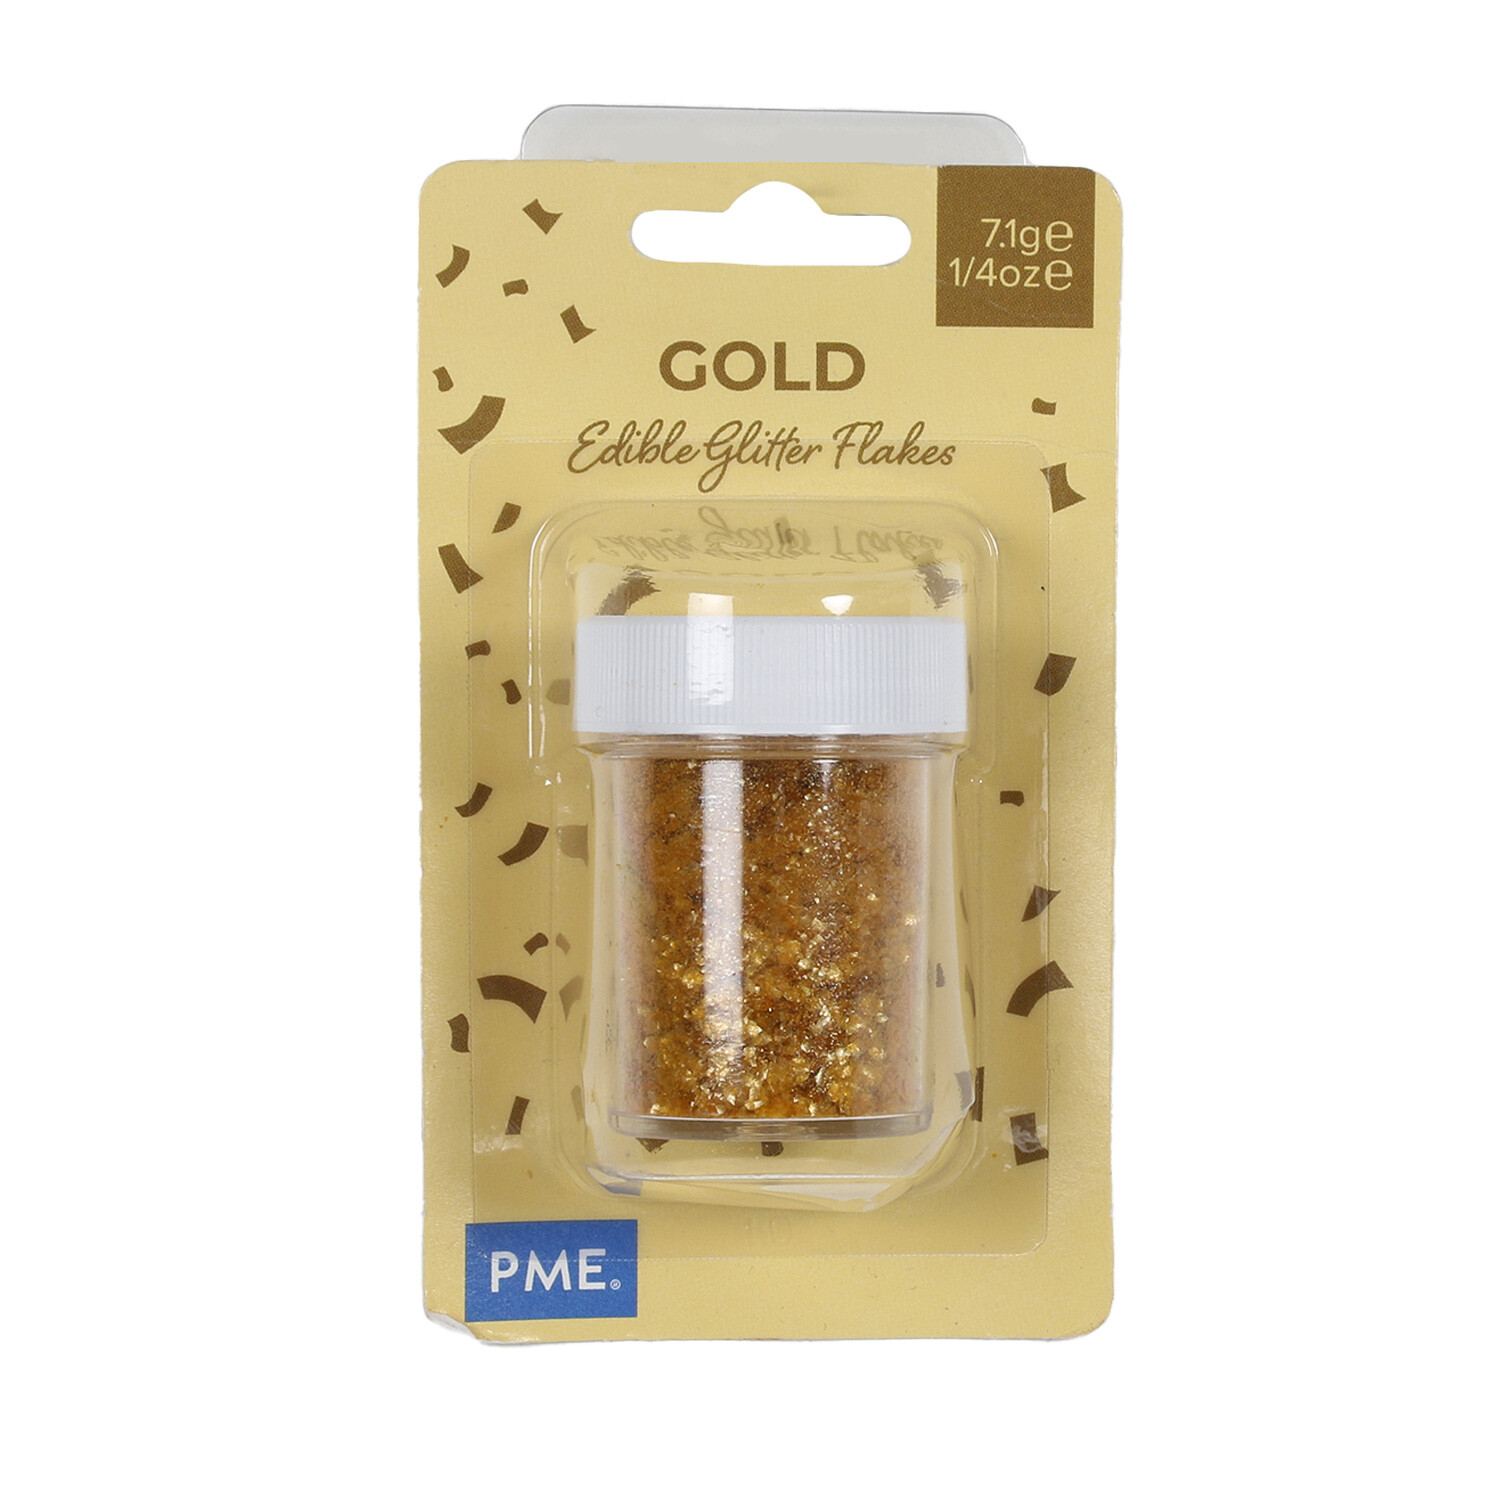 Edible Glitter Flakes - Gold Image